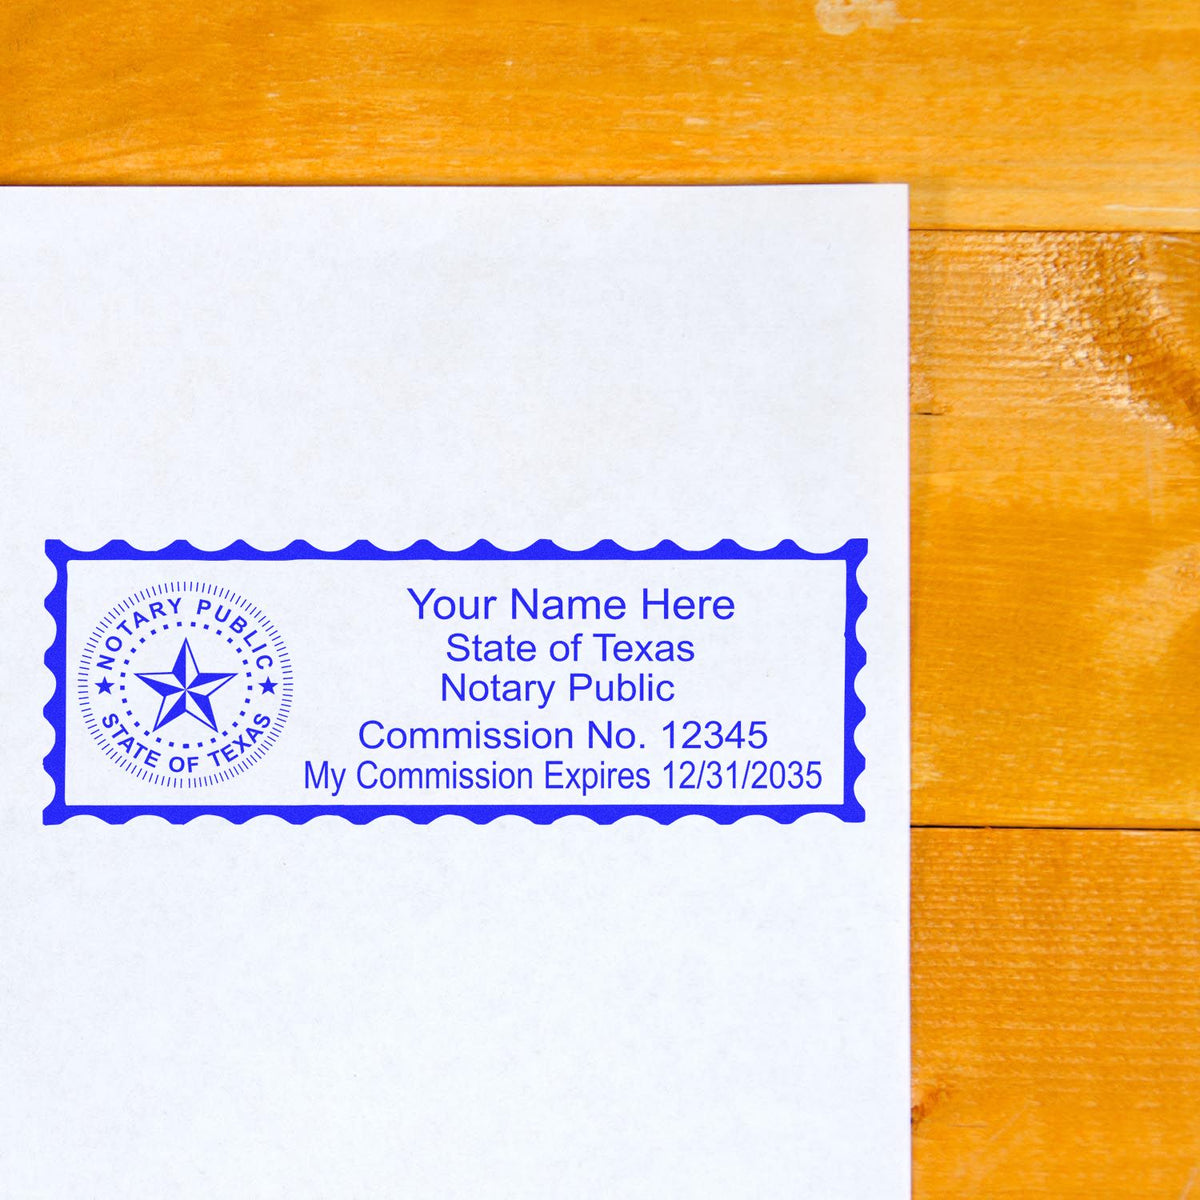 The MaxLight Premium Pre-Inked Texas State Seal Notarial Stamp stamp impression comes to life with a crisp, detailed photo on paper - showcasing true professional quality.